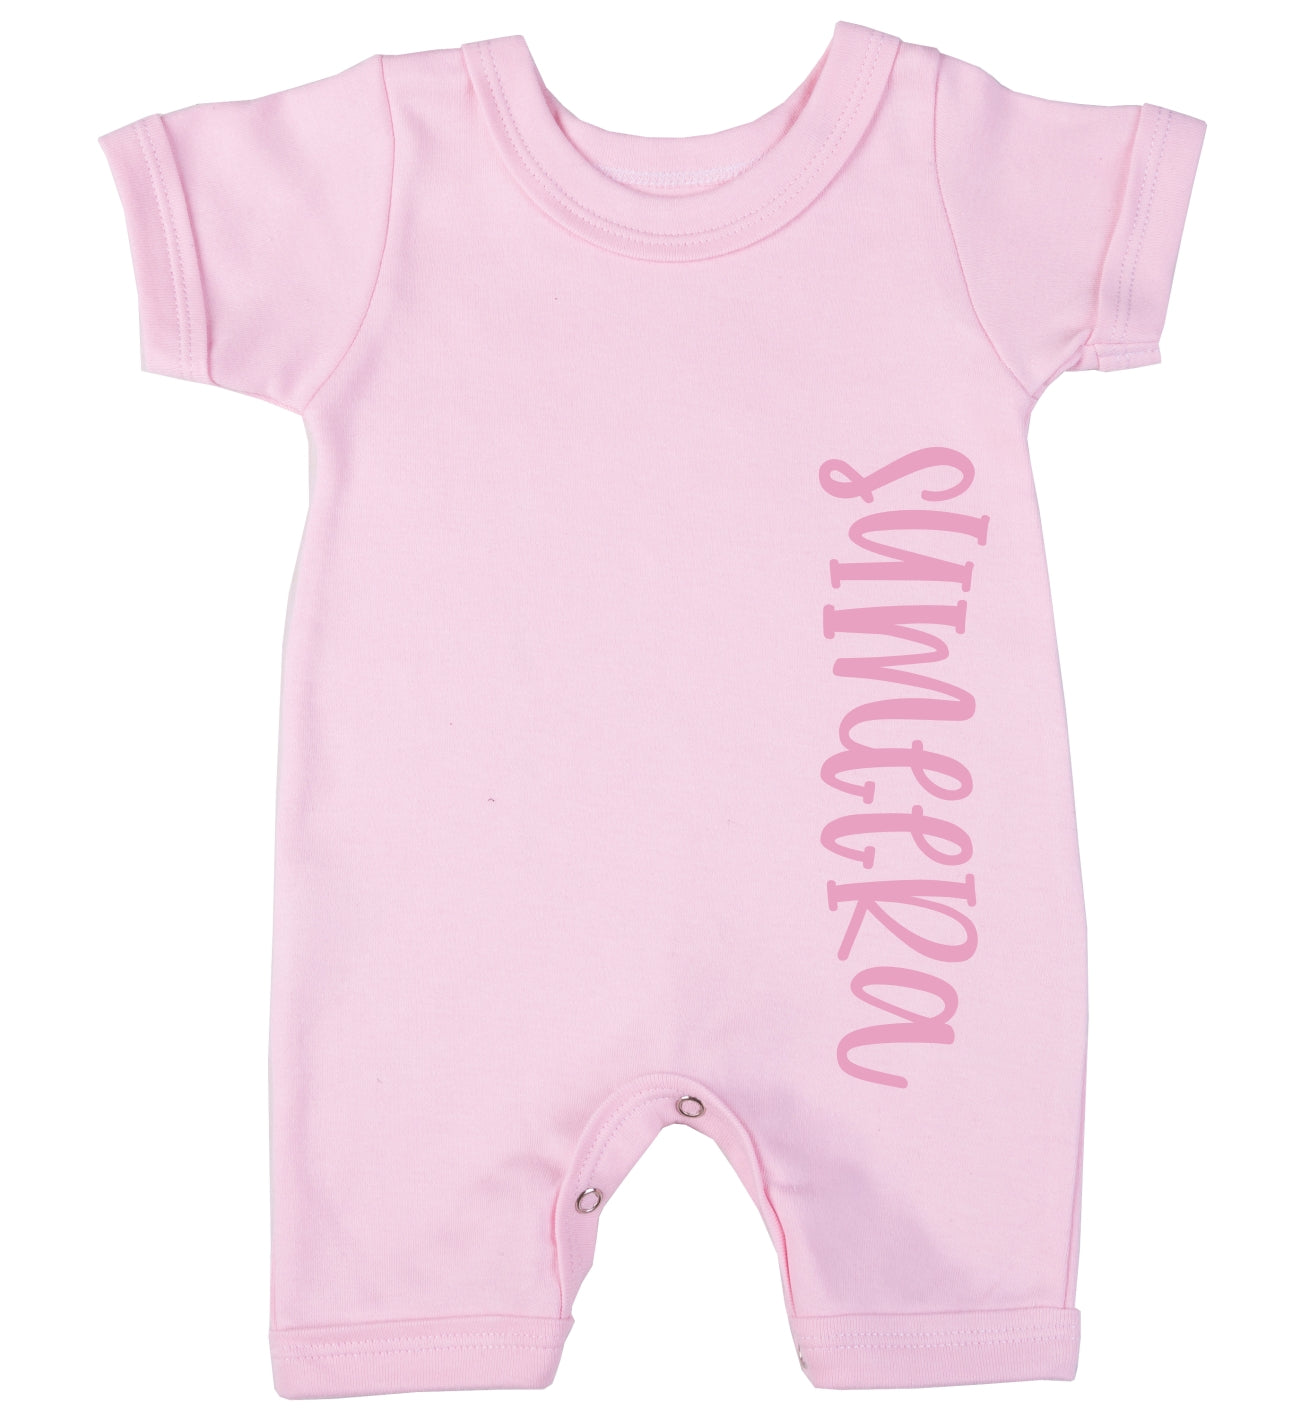 Personalised Baby Summer Romper - Little Lumps